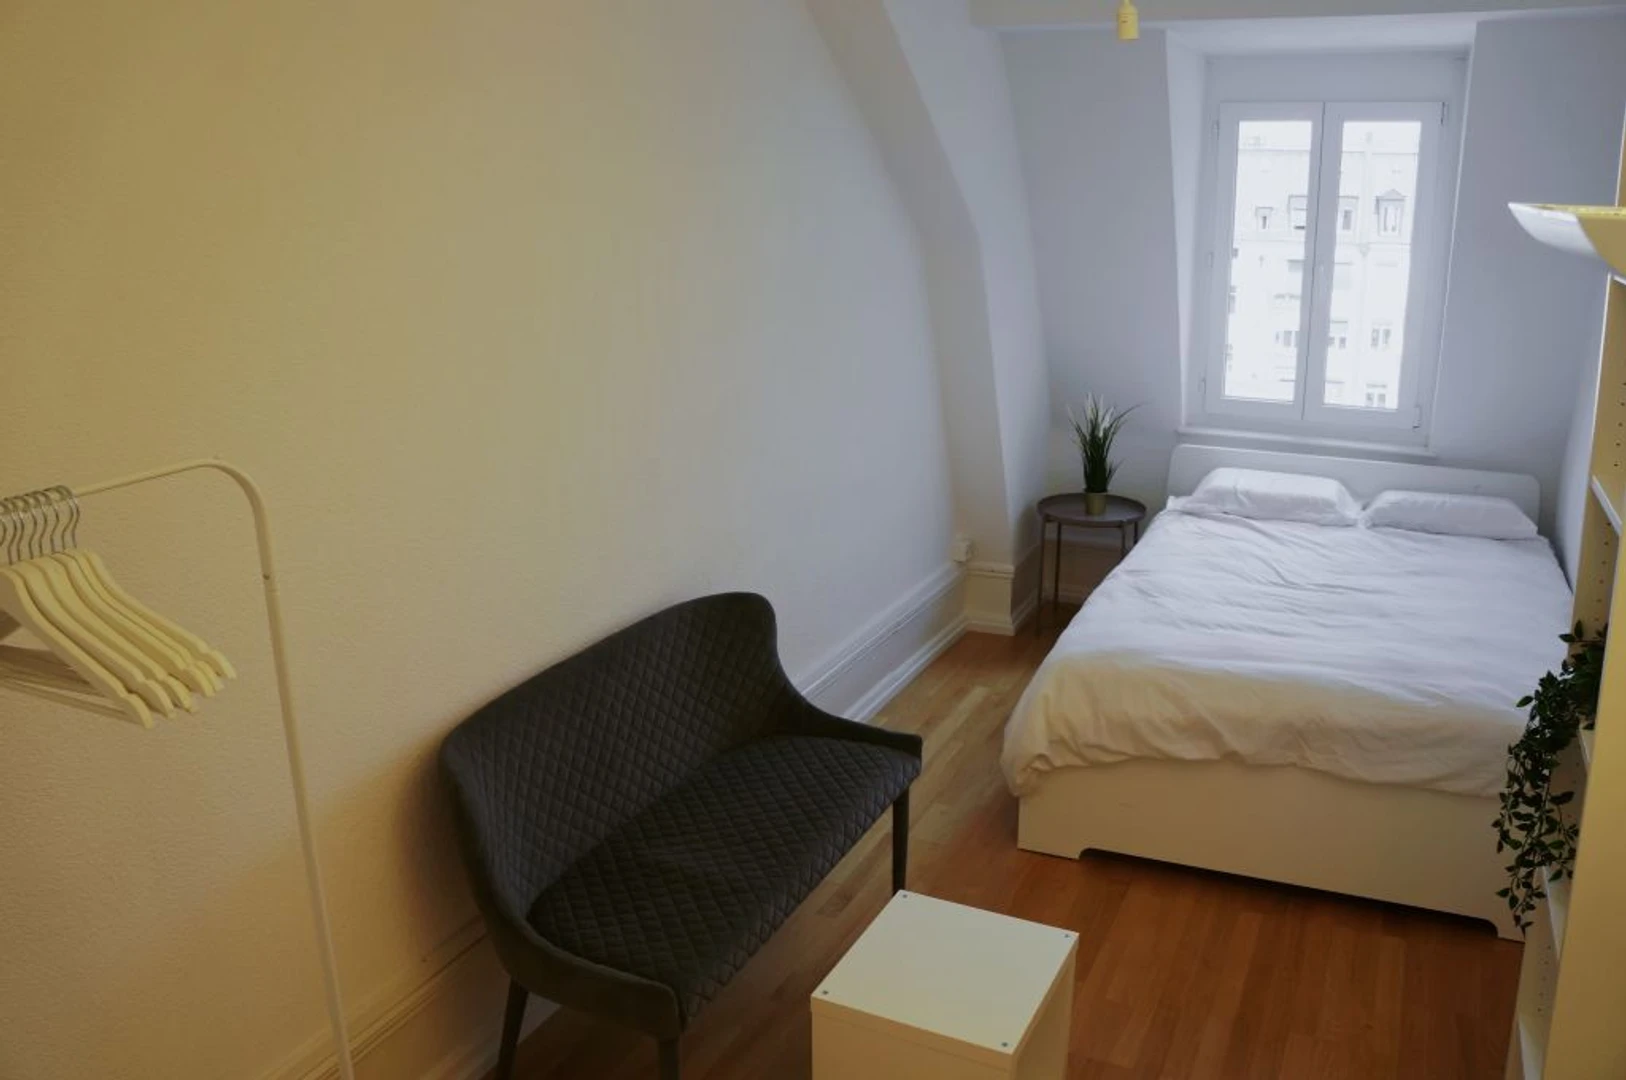 Renting rooms by the month in zurich